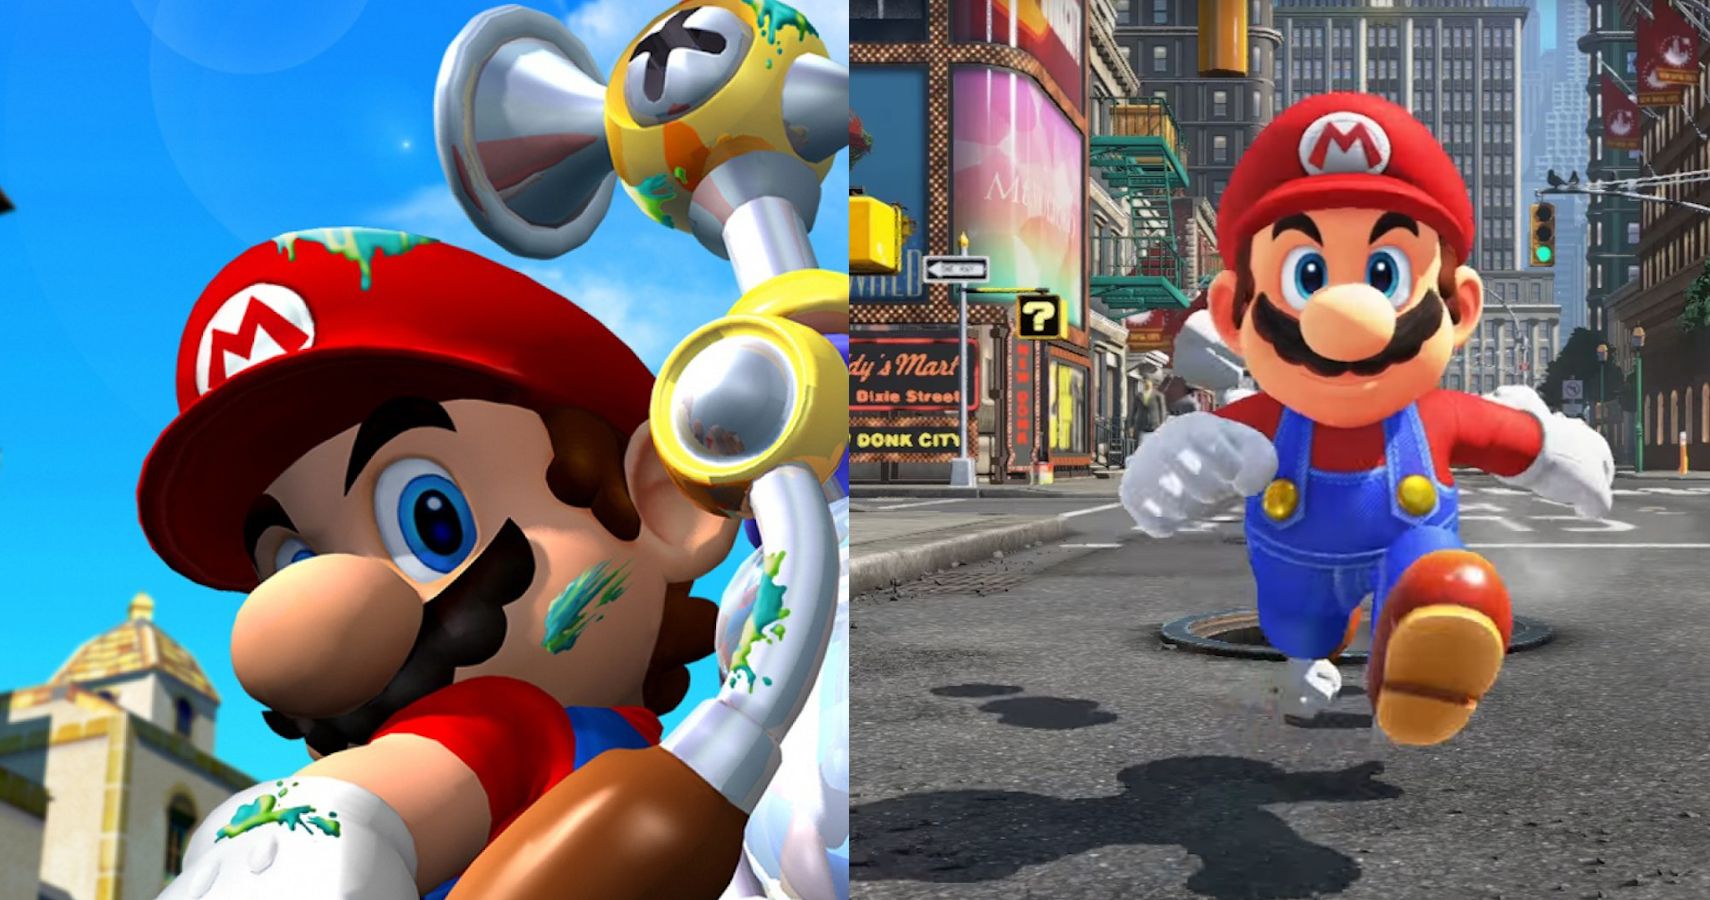 Super Mario 3D World multiplayer may not mix with a relationship - Polygon